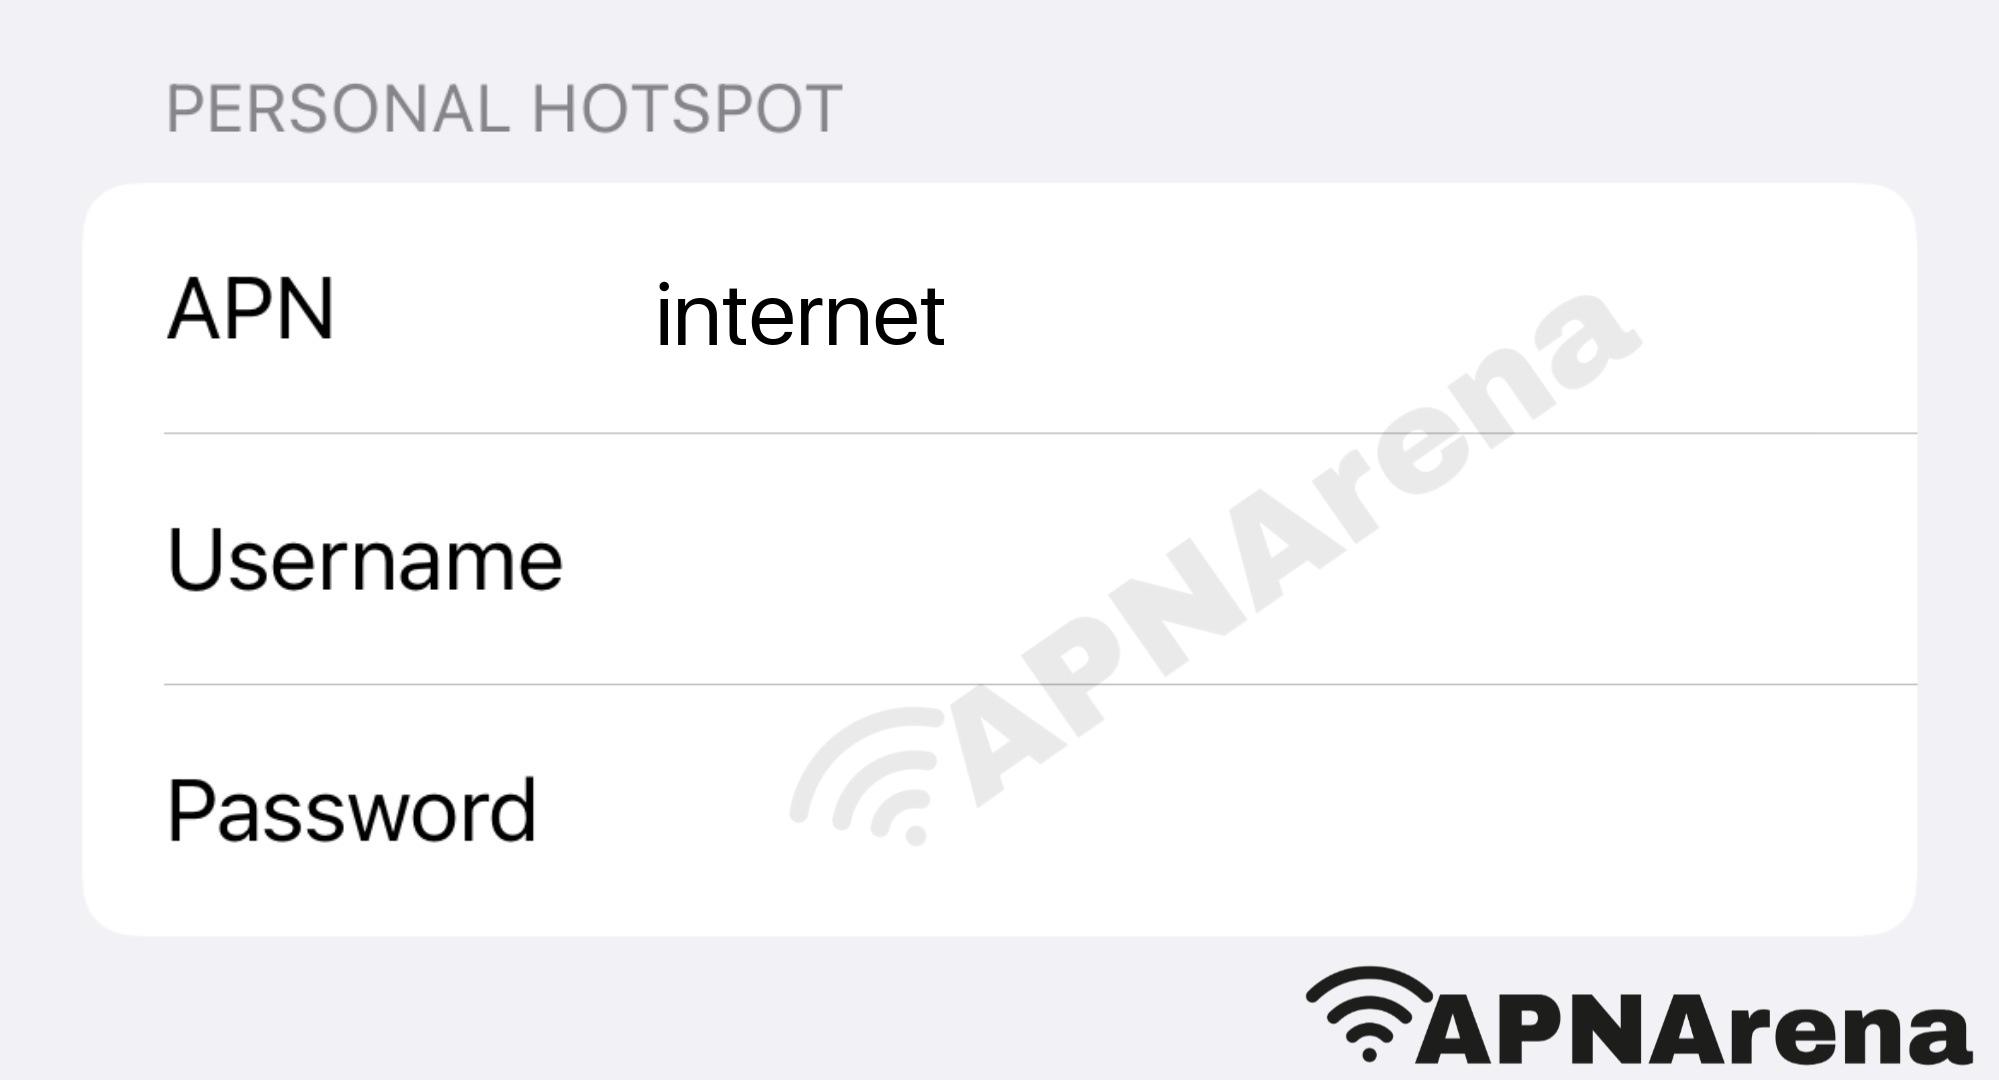 Banglalink (BL) Personal Hotspot Settings for iPhone